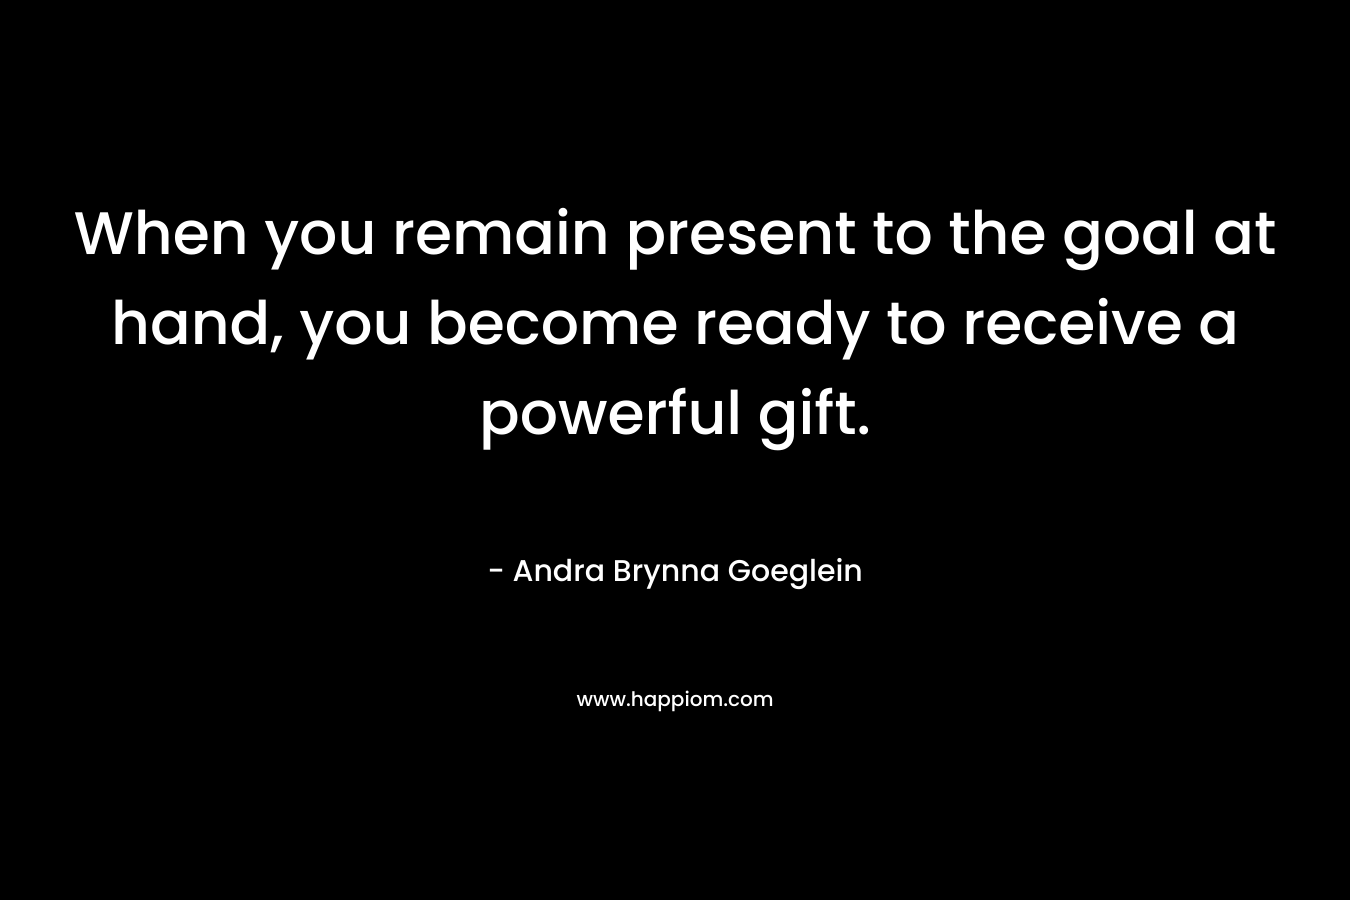 When you remain present to the goal at hand, you become ready to receive a powerful gift.